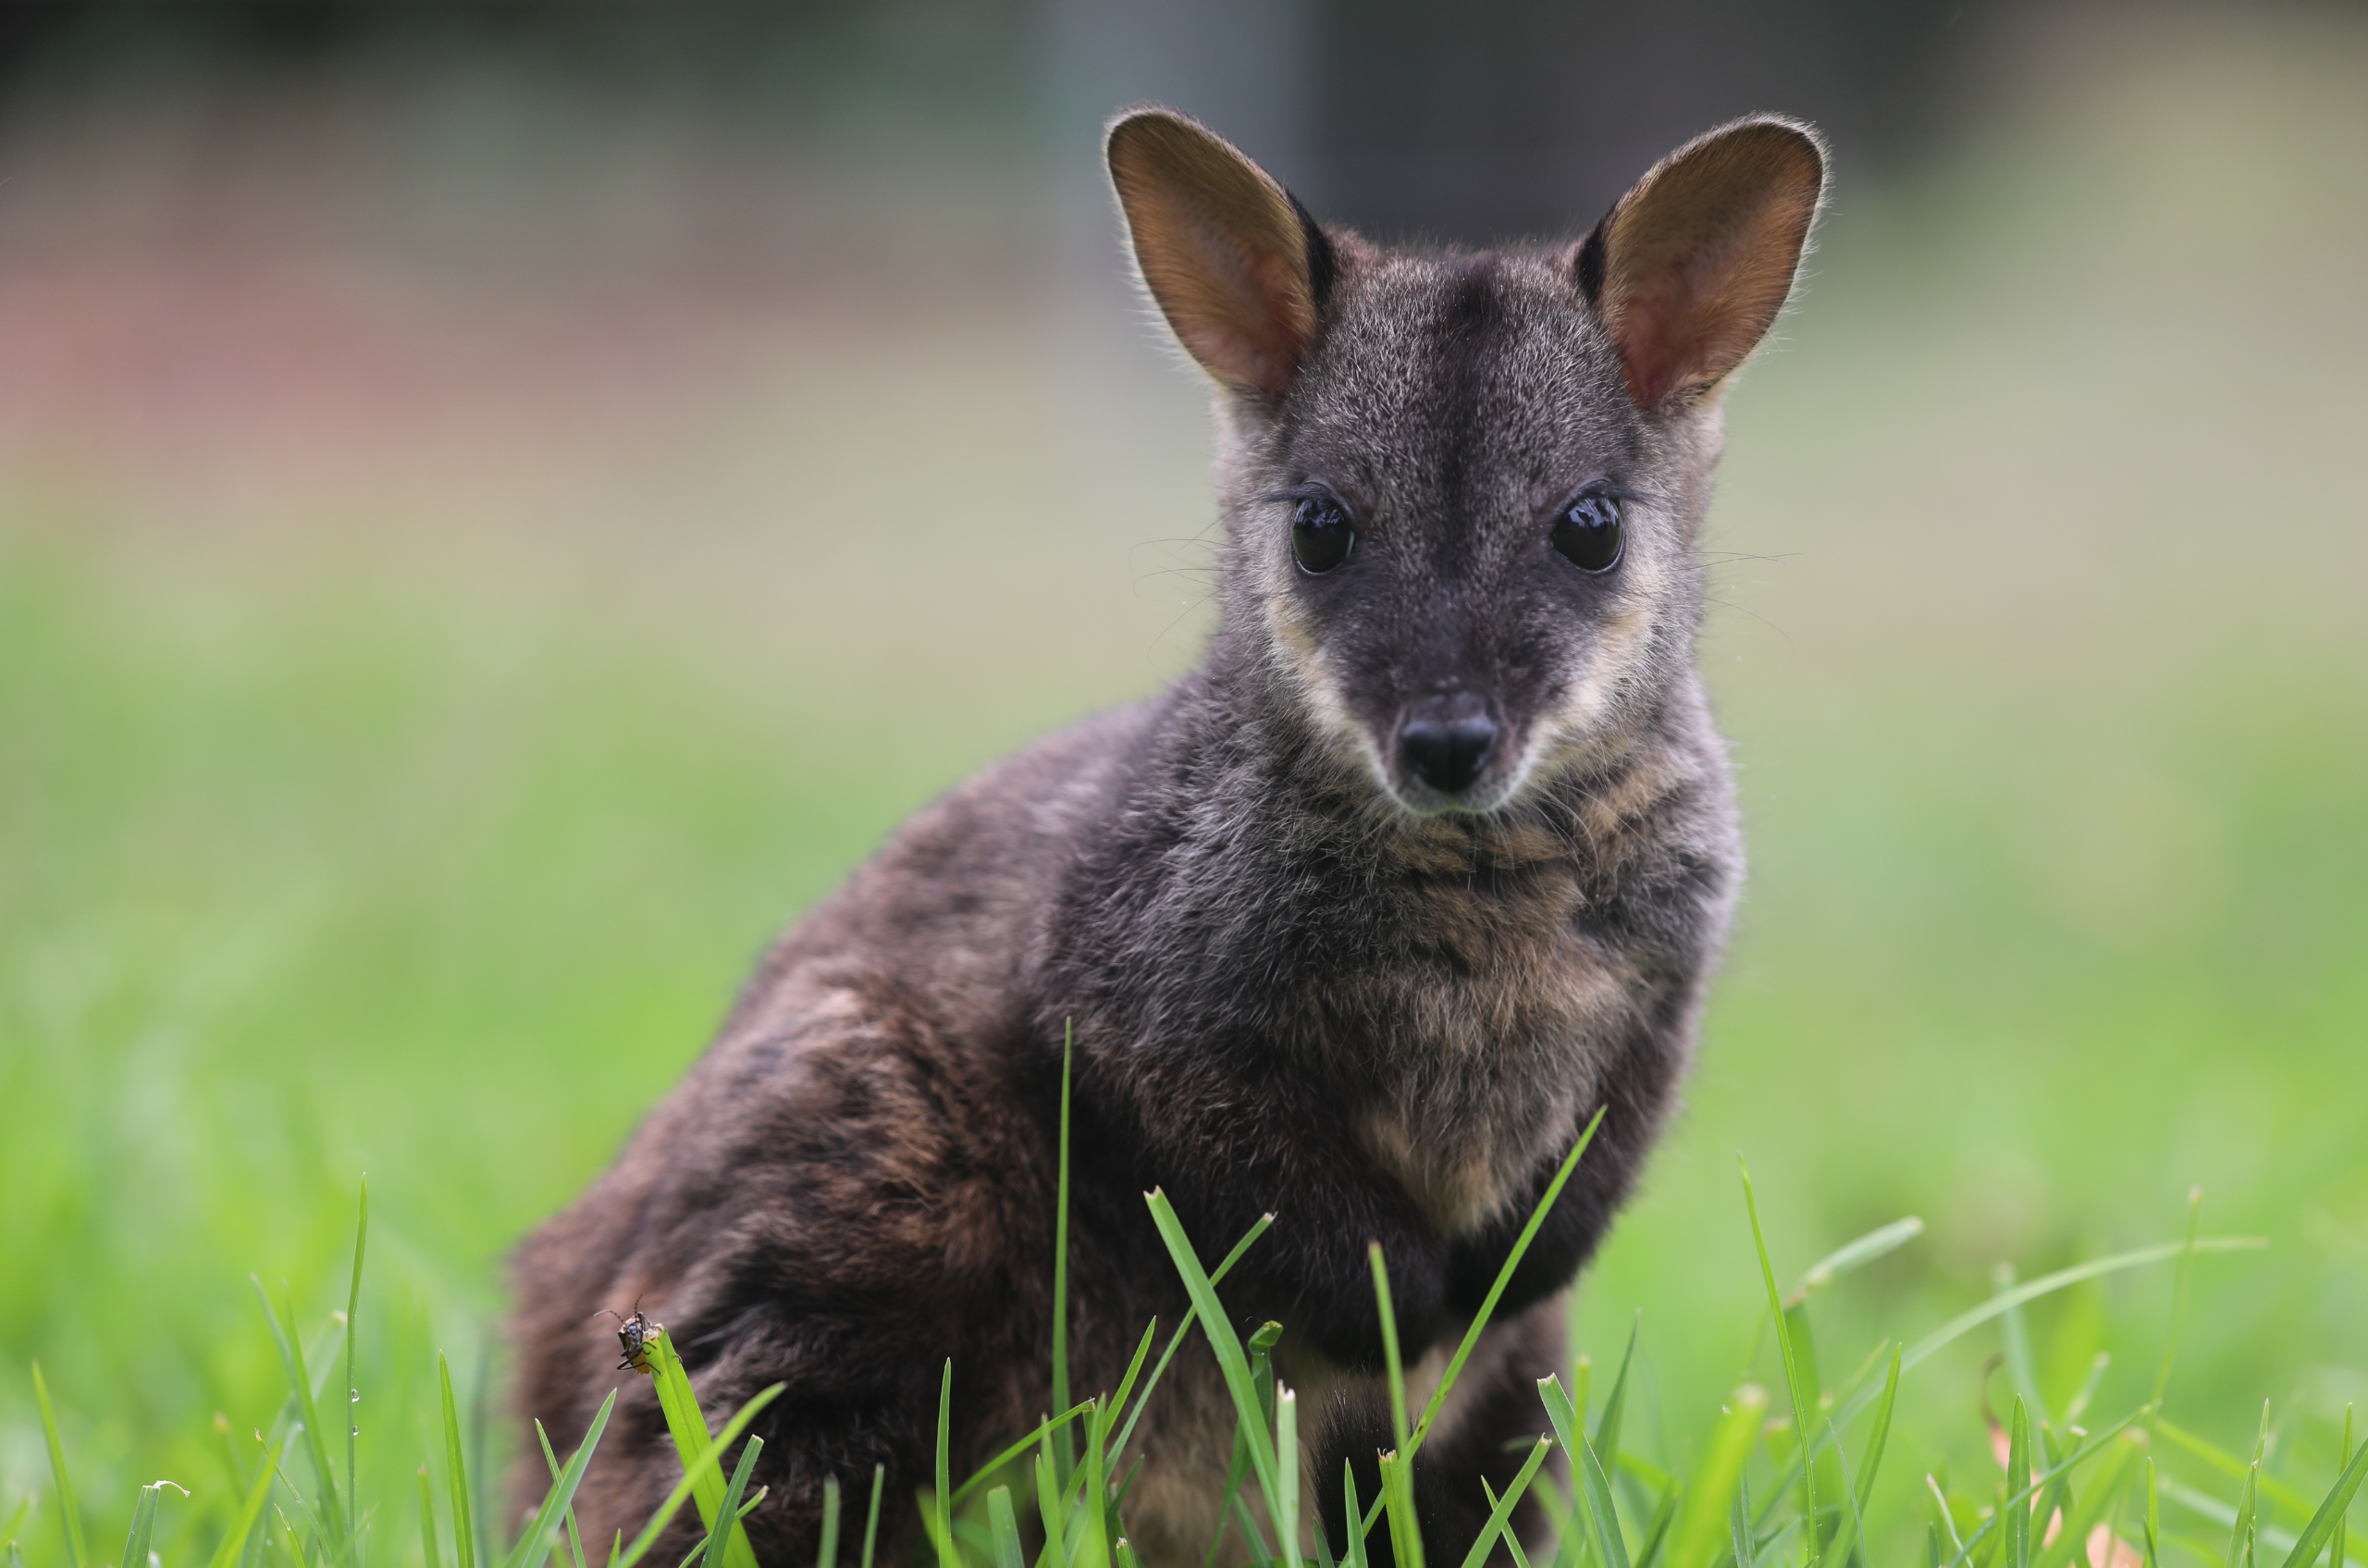 Meet Rocket – Our Baby Wallaby!